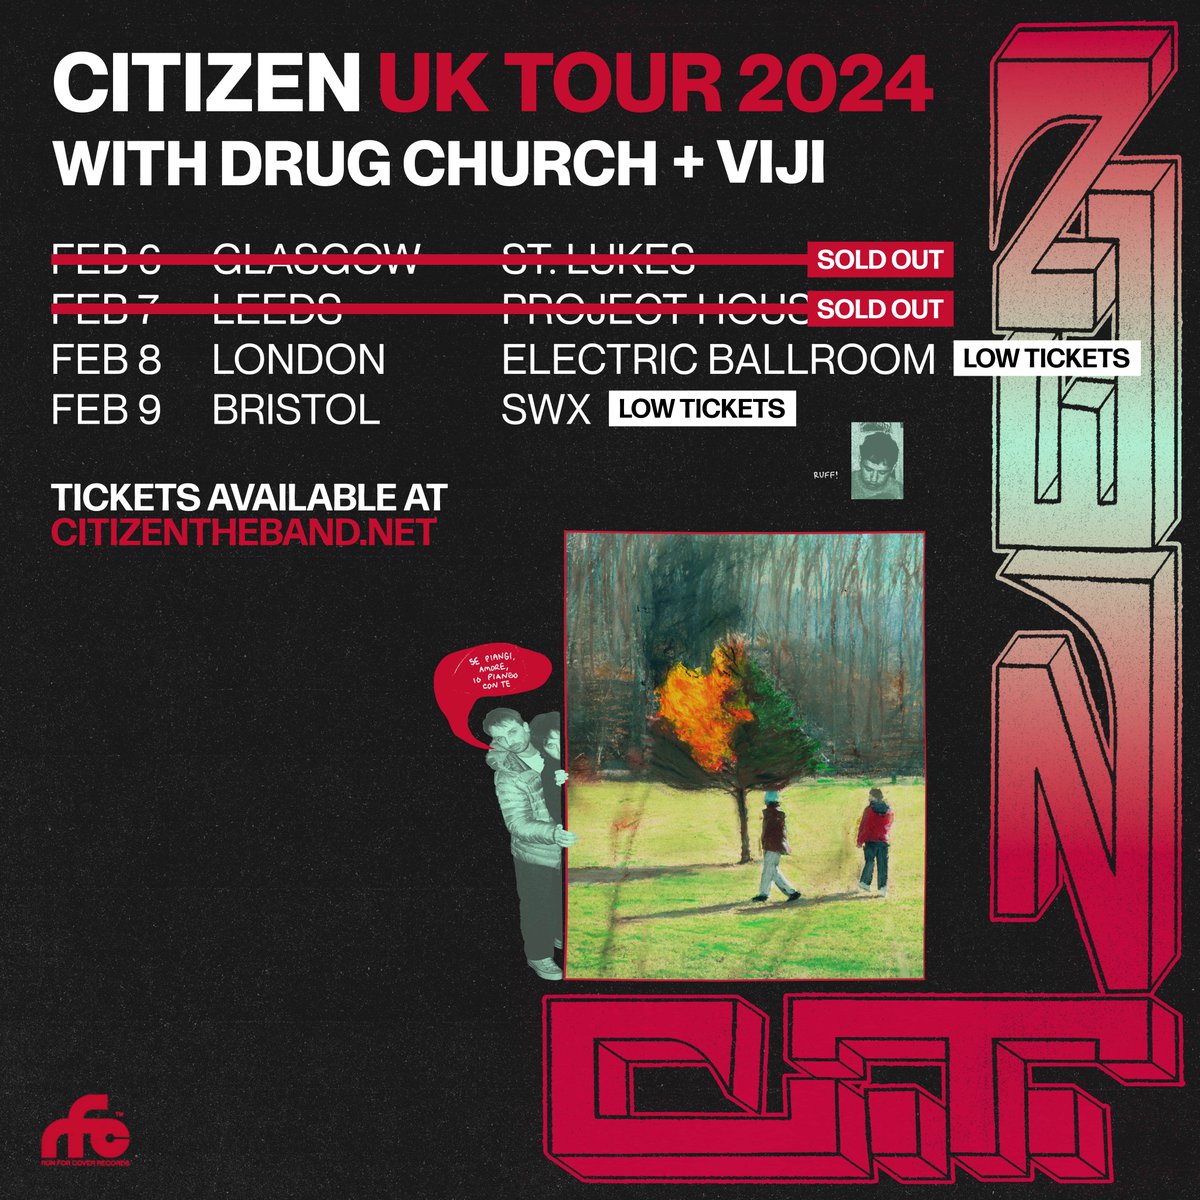 Happy to welcome Viji to the @CitizenMi UK tour with @DrugChurch Final tickets: outbreak.seetickets.com